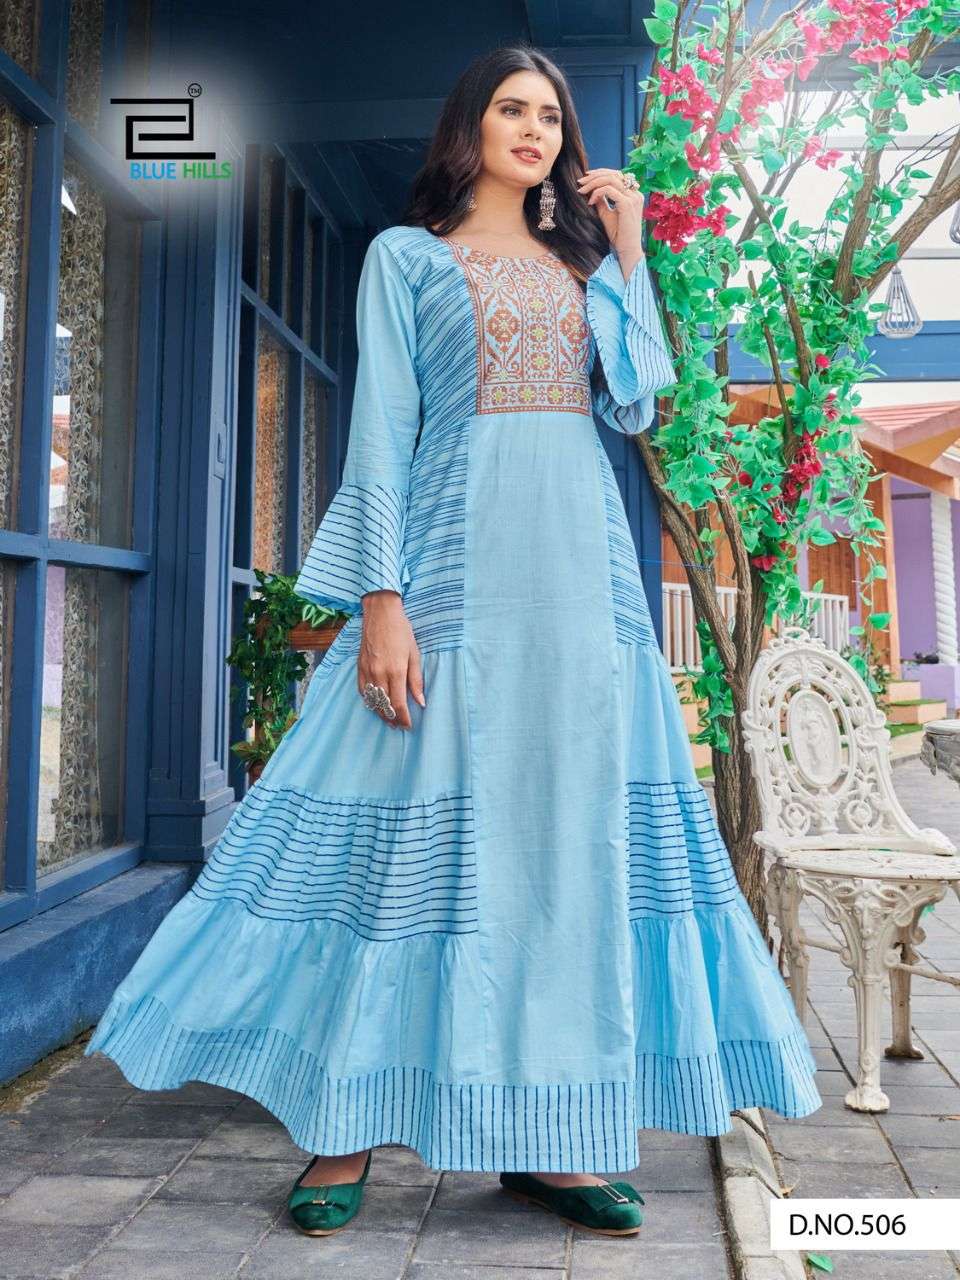 BLUE HILLS LIVIK VOL 5 DESIGNER COTTON CAMBRIC WITH NECK EMBROIDERY LONG FRILL GOWNS WHOLESALE